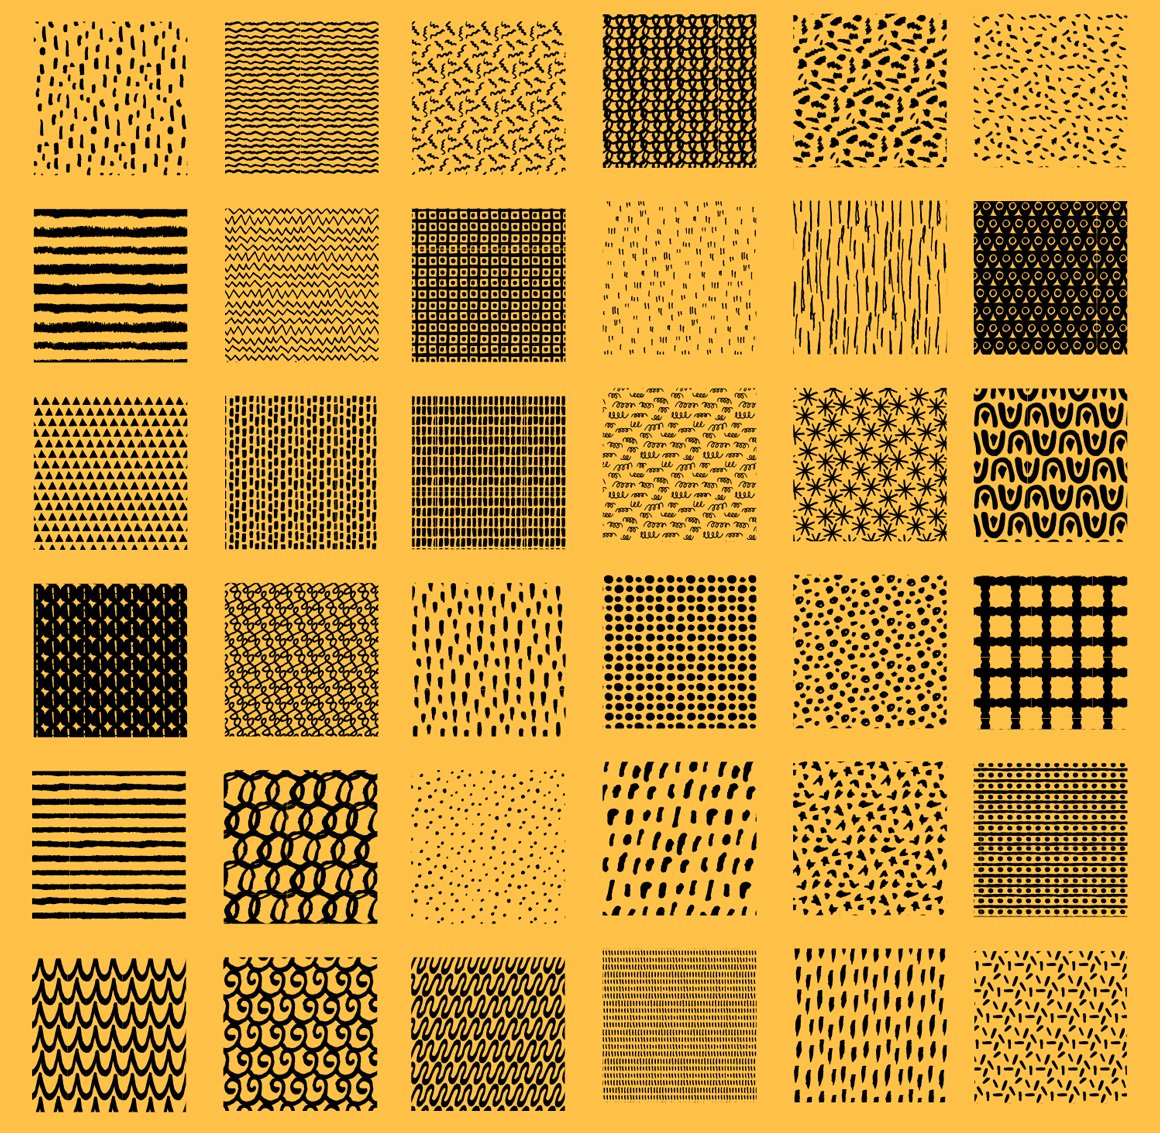 Patts Brush Collection for Adobe Illustrator